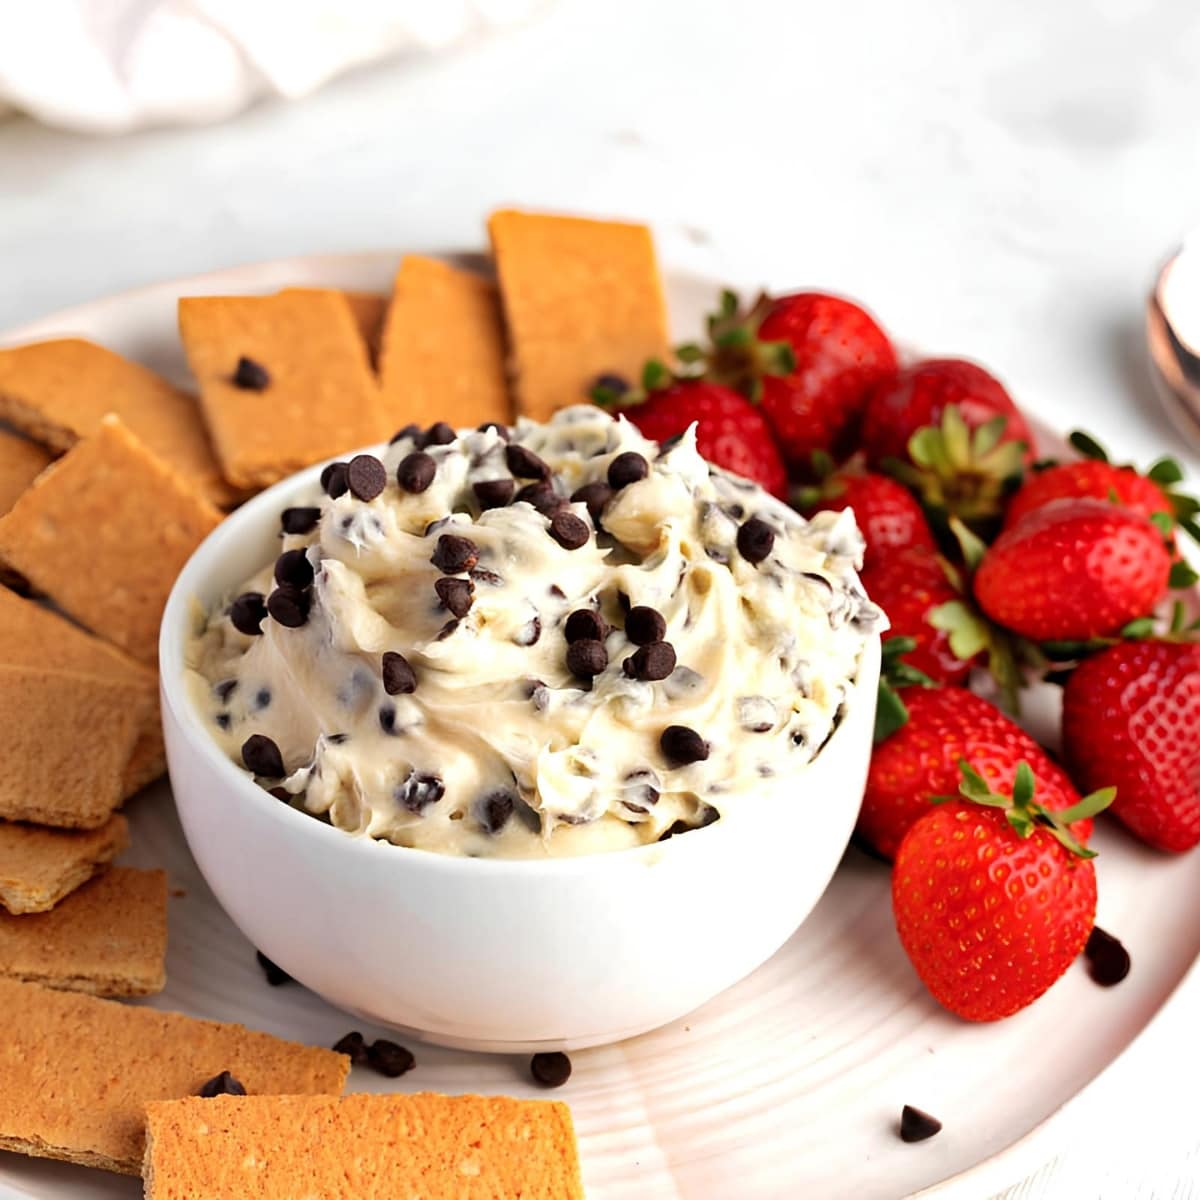 Bowl of Cheesecake Dip and Platter of Crackers and Fresh Strawberries